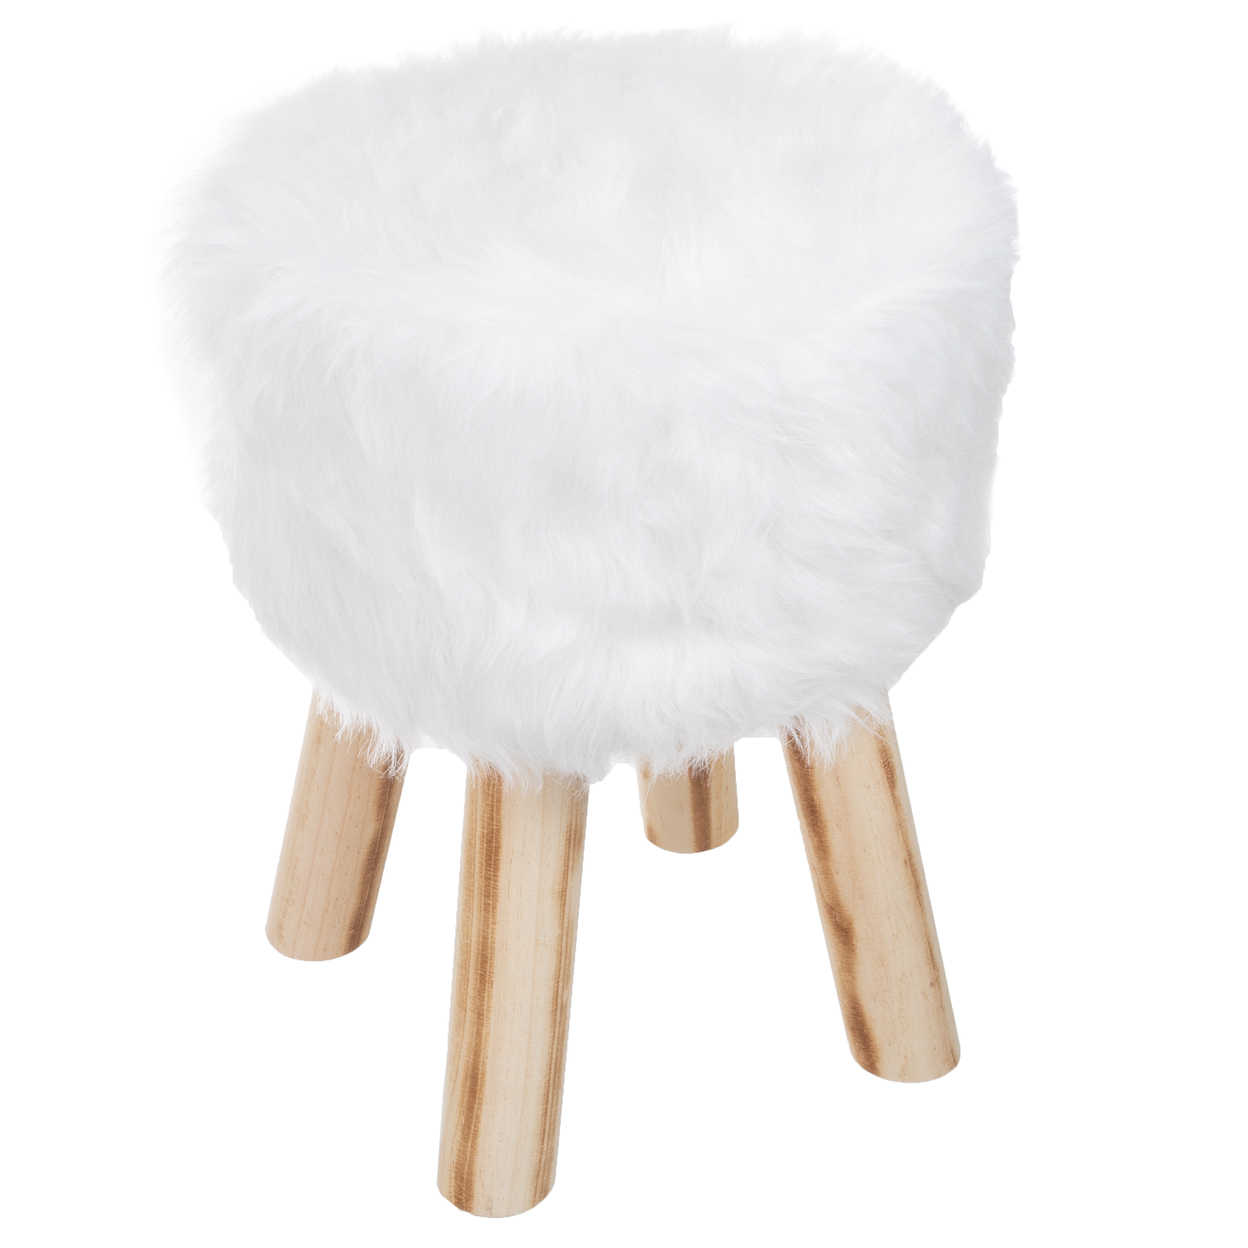 Ottoman - Round Footrest Vanity Chair, Or Accent Stool With Faux Fur Fuzzy Fabric